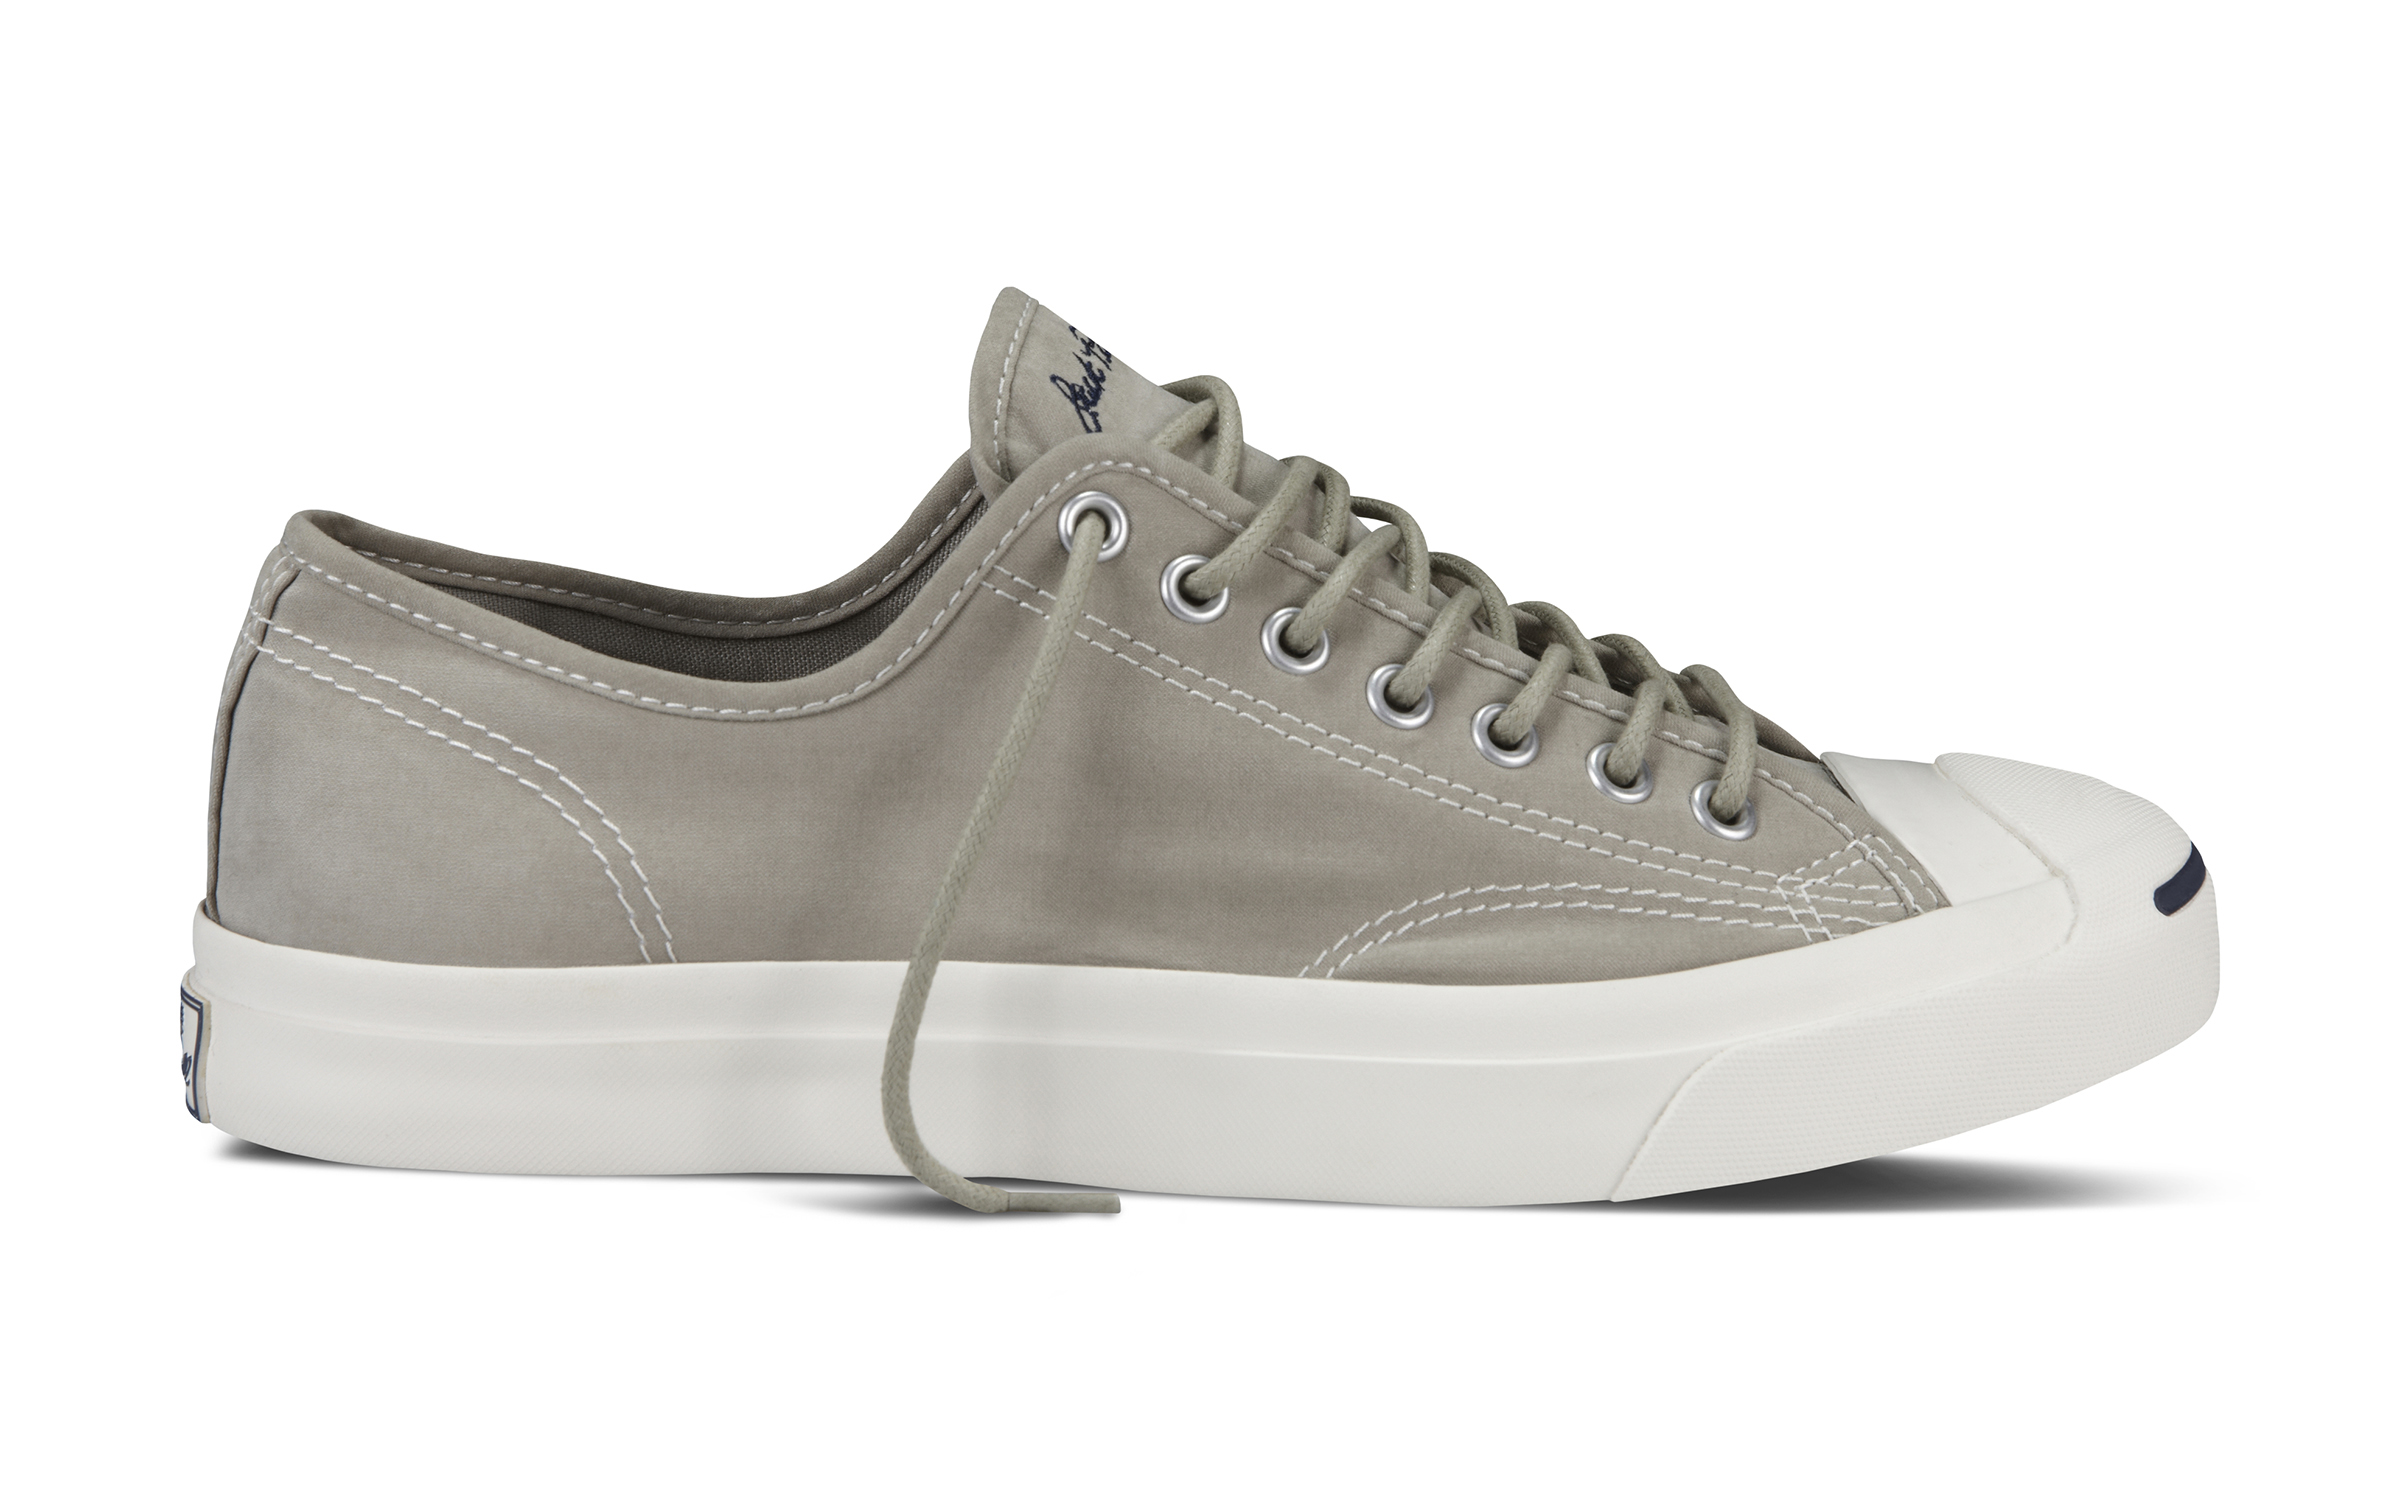 Converse Fall 2014 Jack Purcell 02